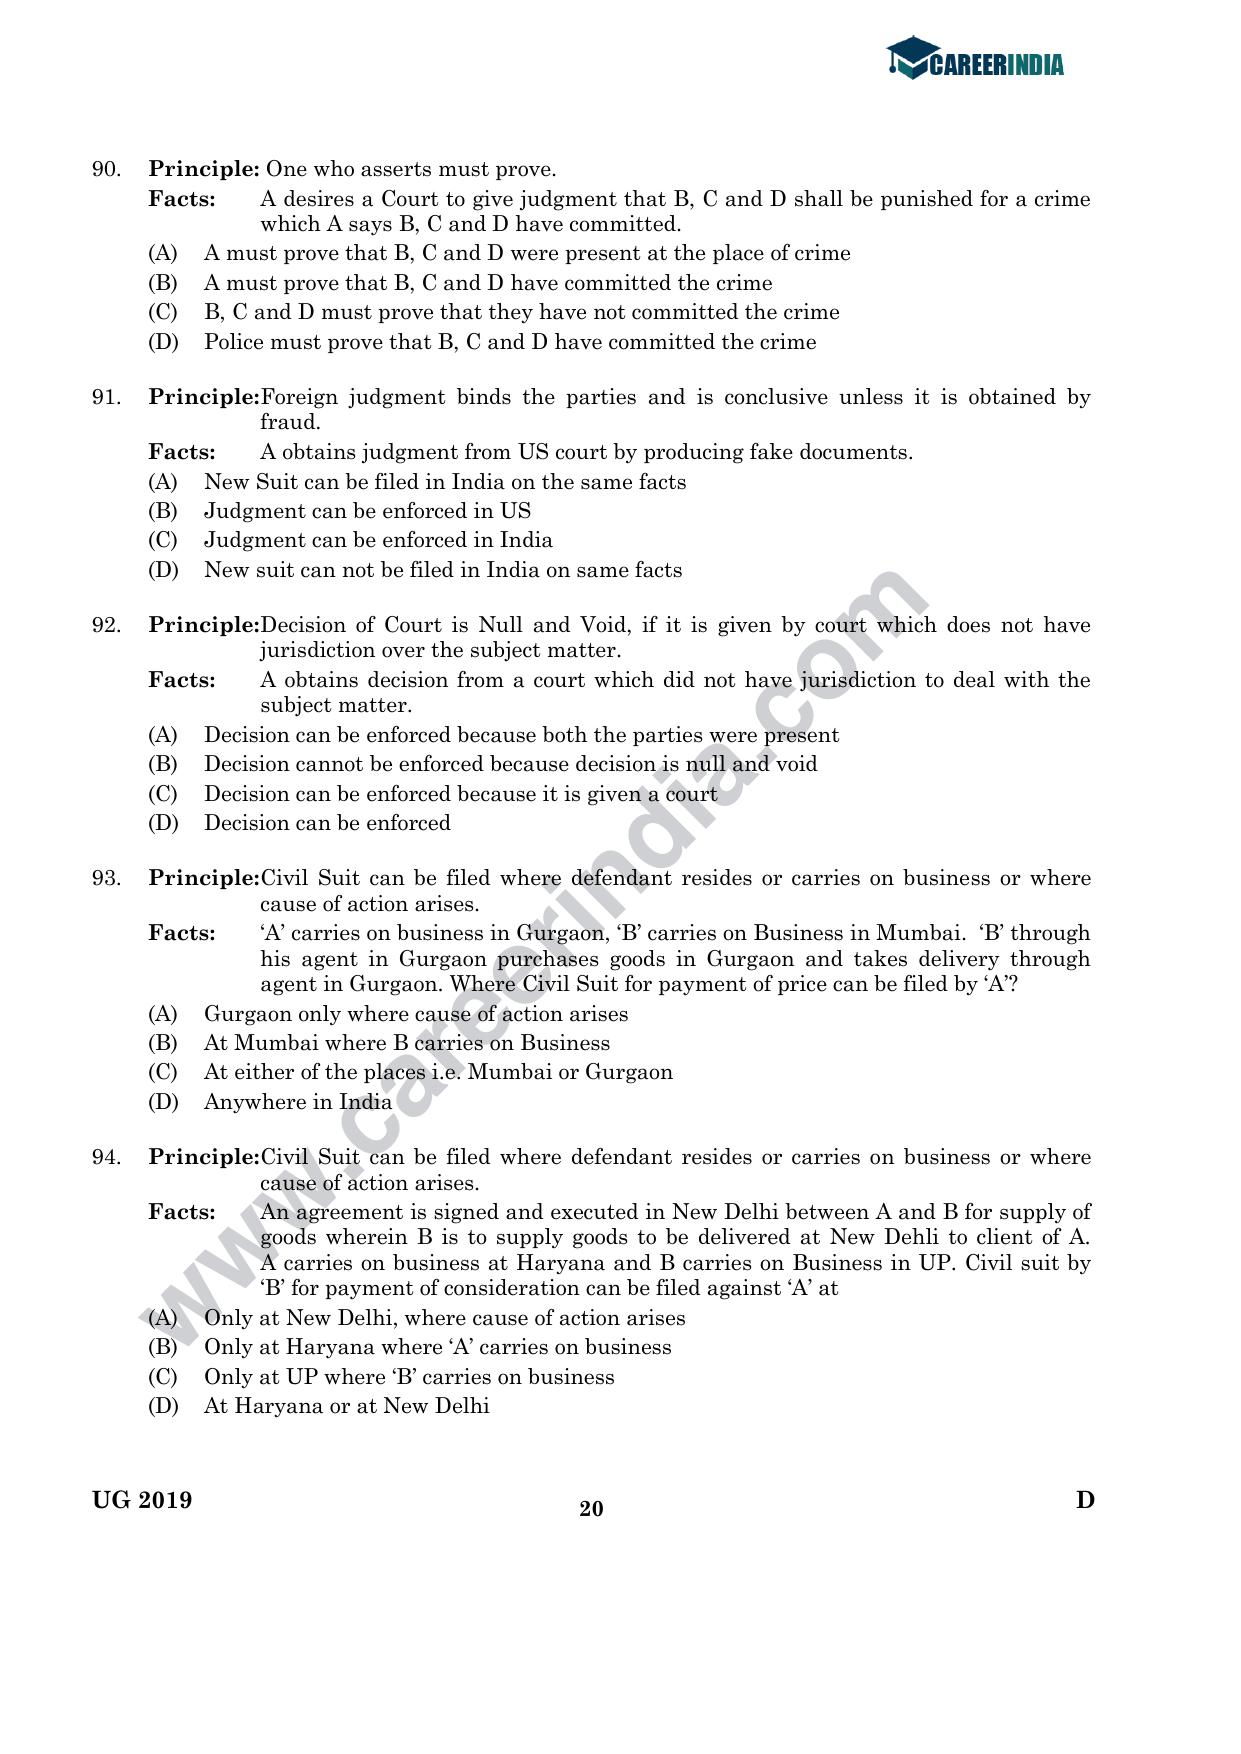 CLAT 2019 UG Logical-Reasoning Question Paper - Page 19